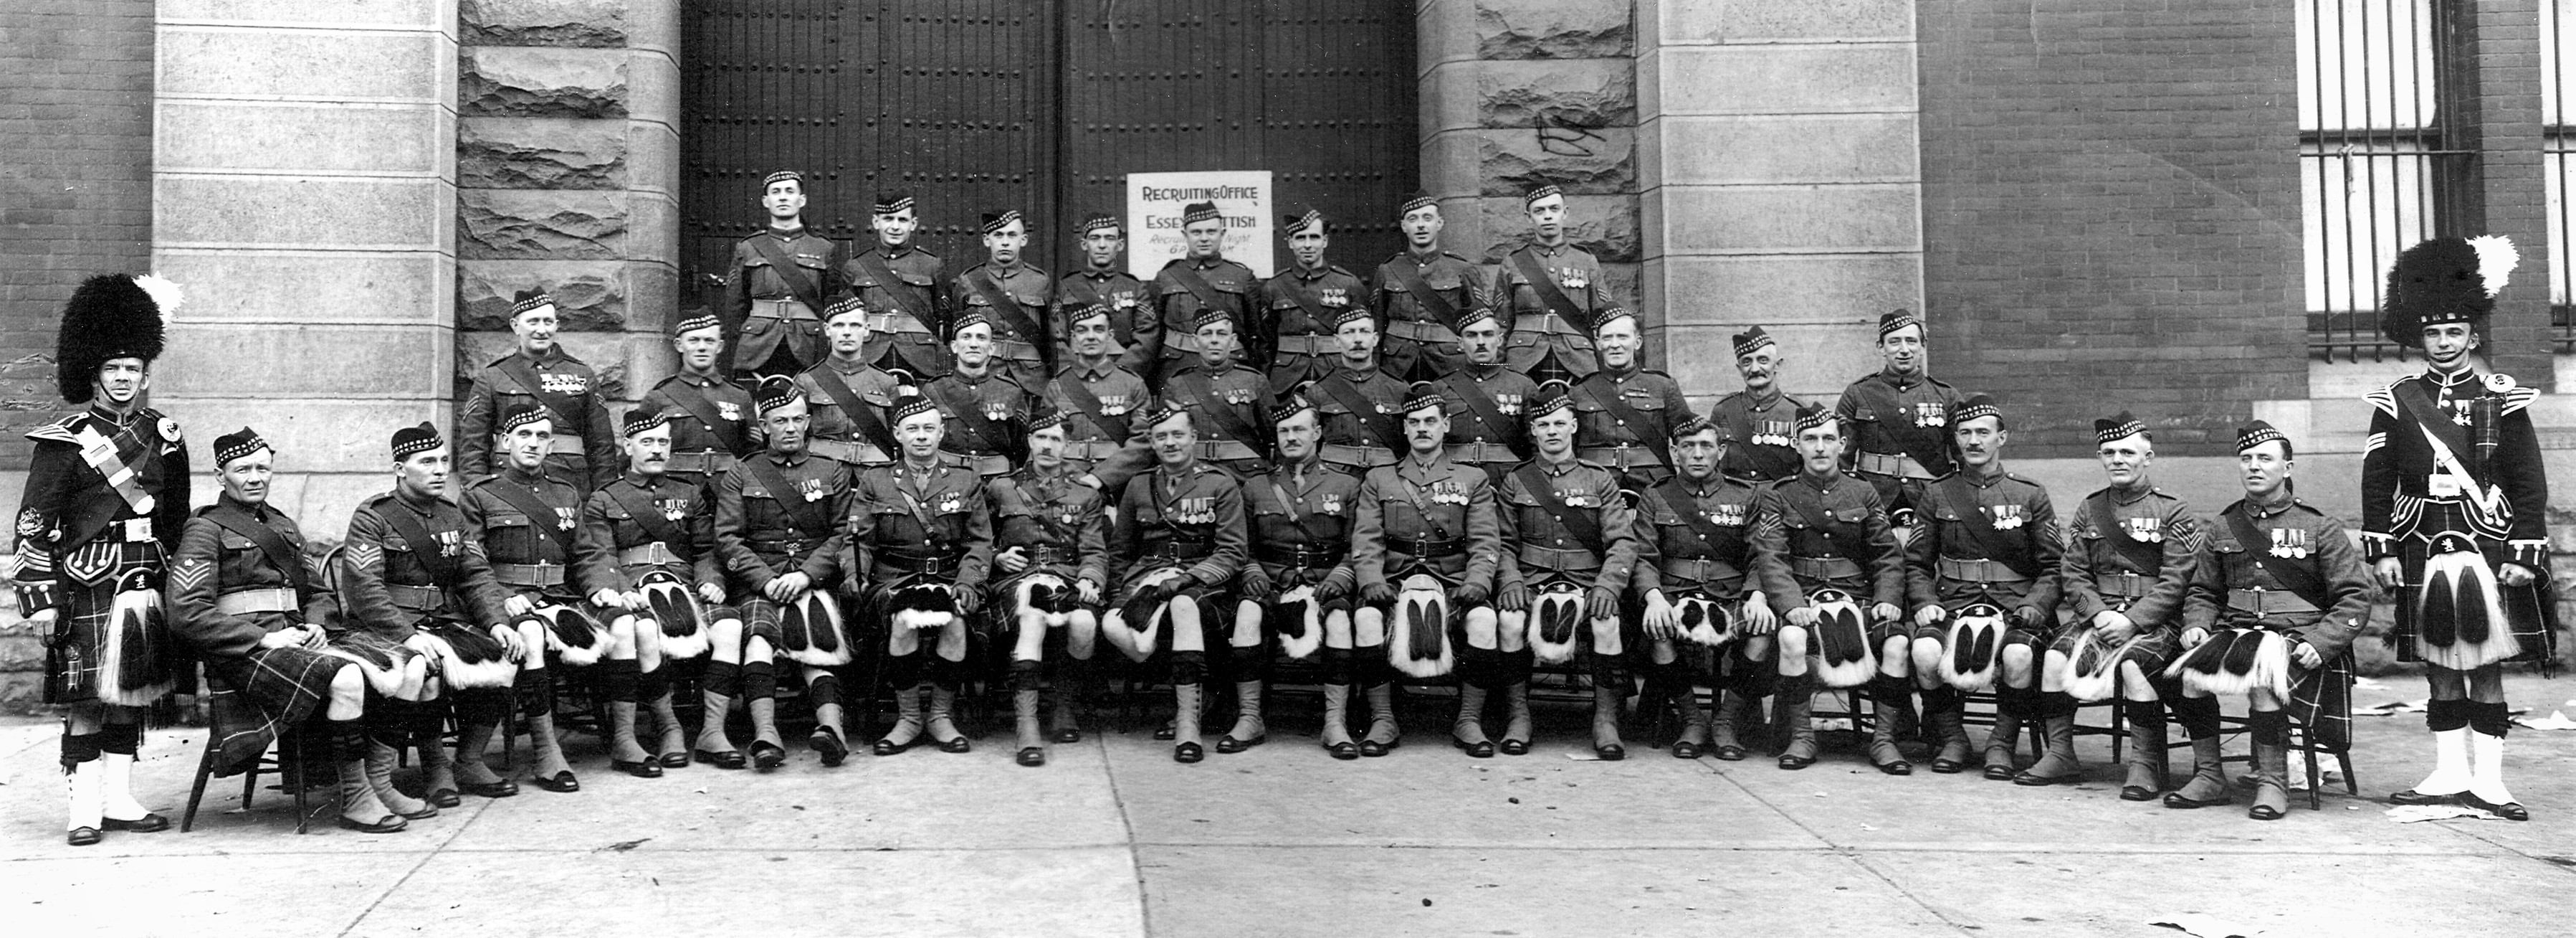 Warrant officers, staff sergeants and sergeants of The Essex Scottish soon after the name change from the Essex Fusiliers in 1927.  Photo courtesy of the family of the late Maurice Snook.